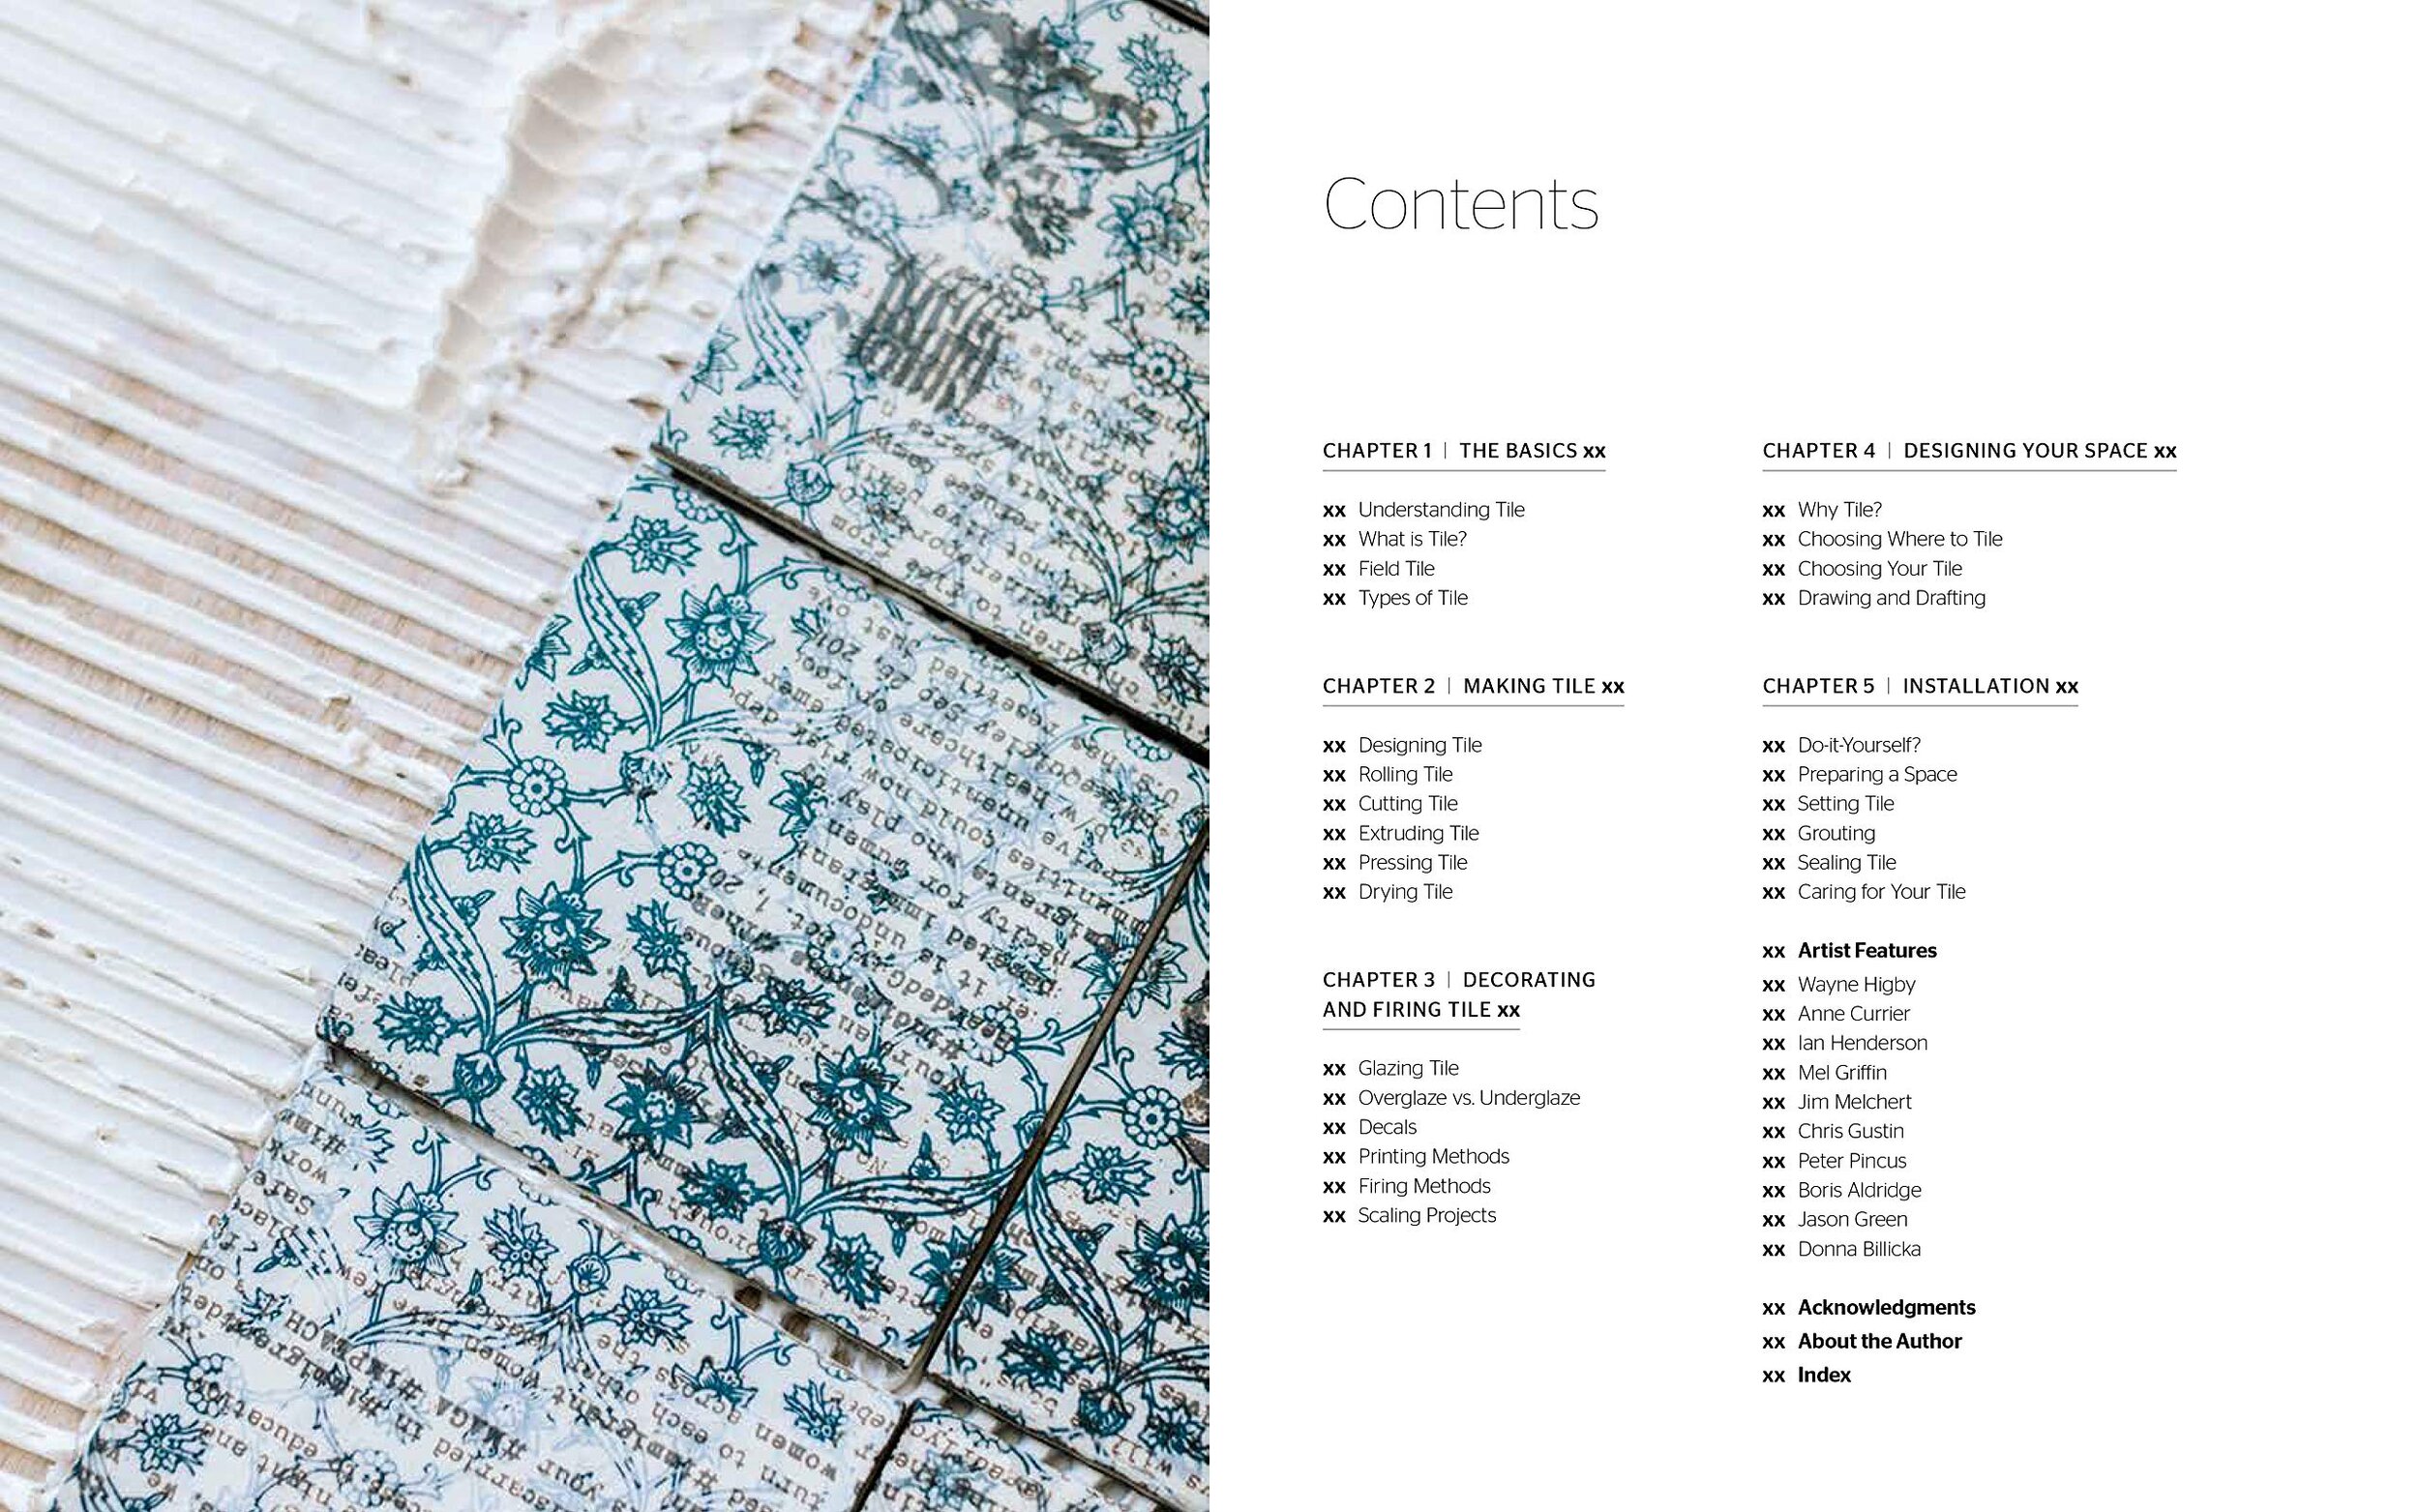 Handmade Tile Table of Contents.jpg